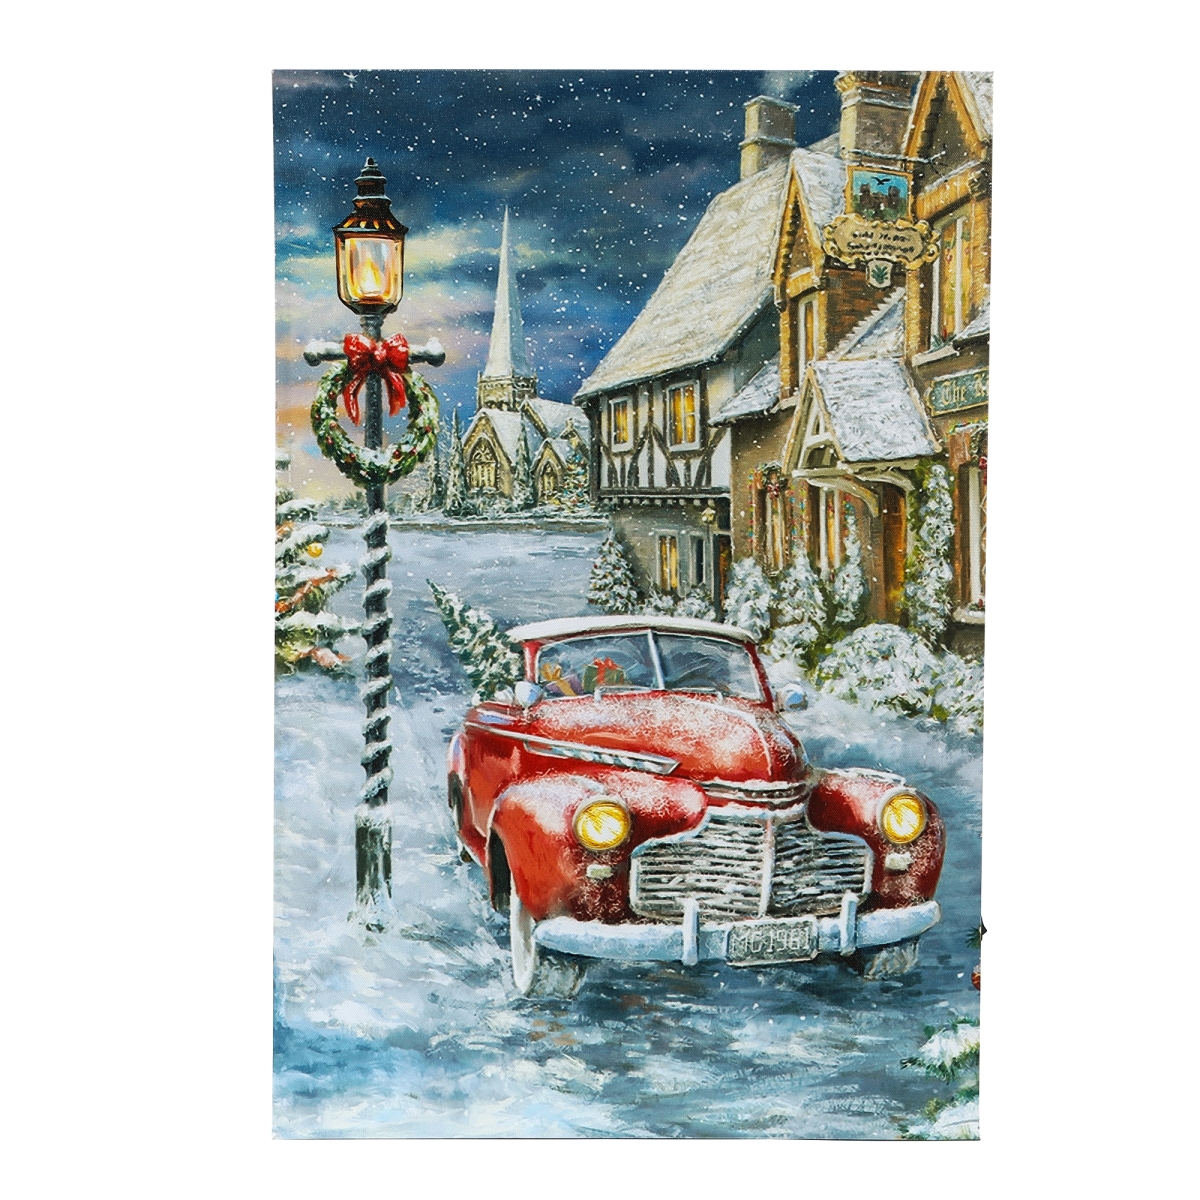 Wha653 Winter Wonderland Home For The Holidays Car Canvas Print Wall Art With Led Lights